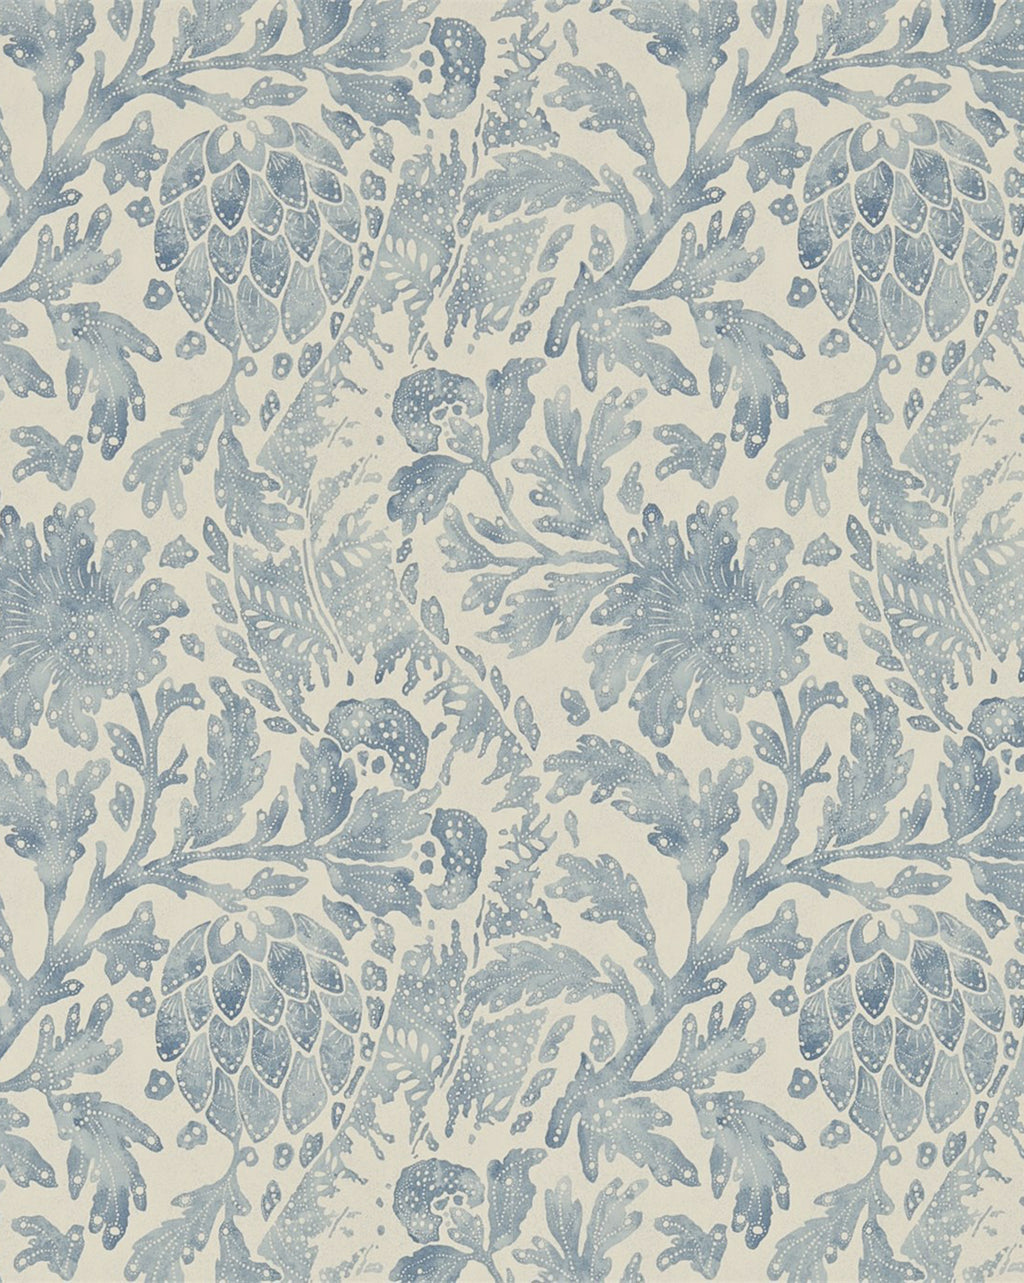 Sketched Meadow Wallpaper in Cornflower Blue on Cream  Lucie Annabel